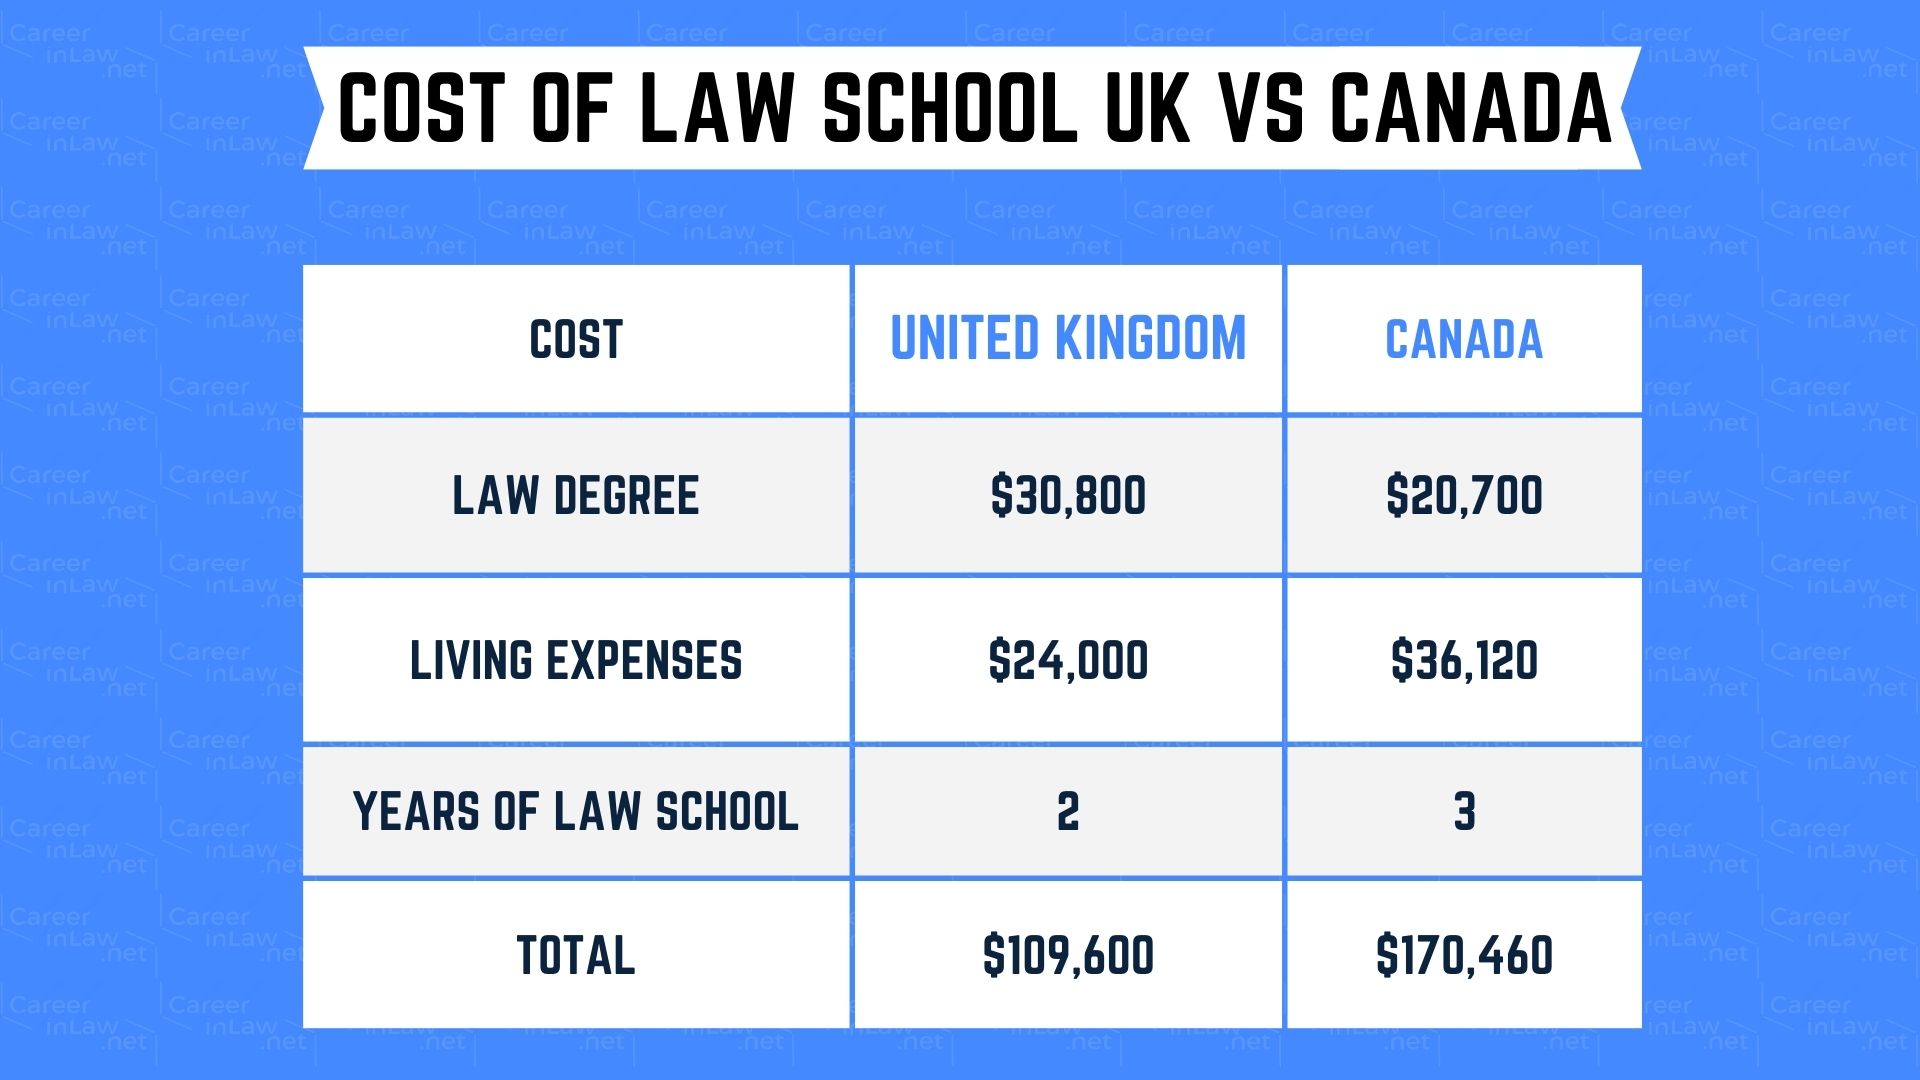 Cost of a Graduate Entry LLB in the UK vs Canada law degree Table